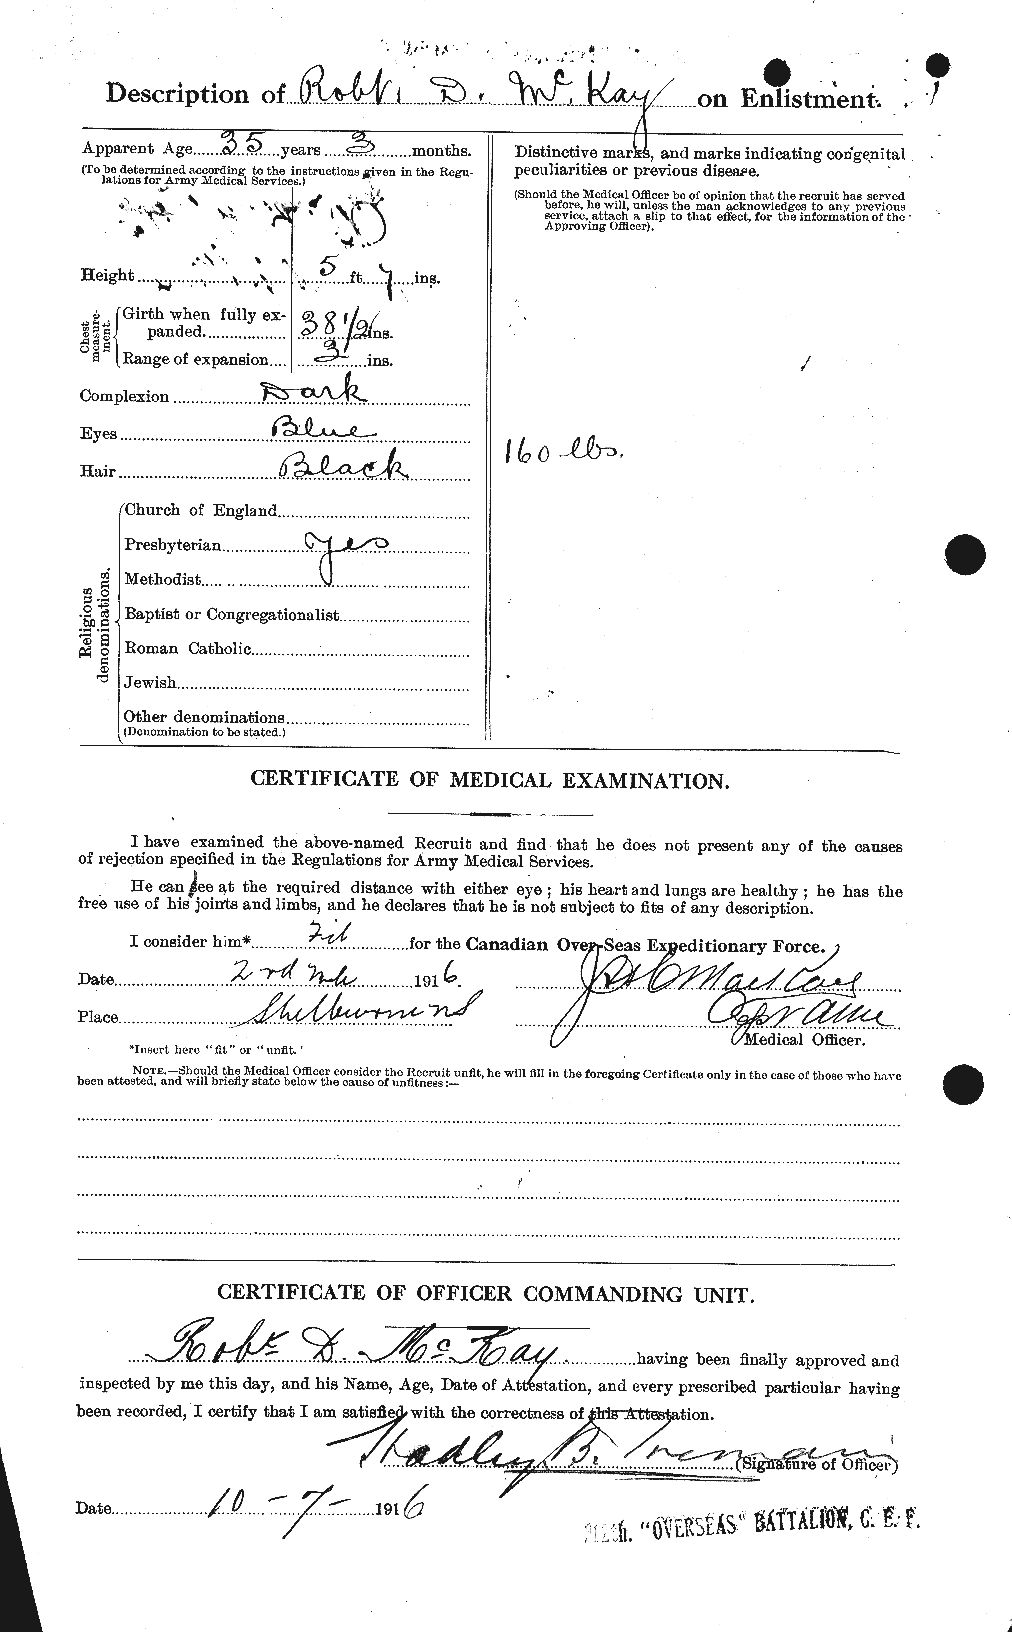 Personnel Records of the First World War - CEF 530093b